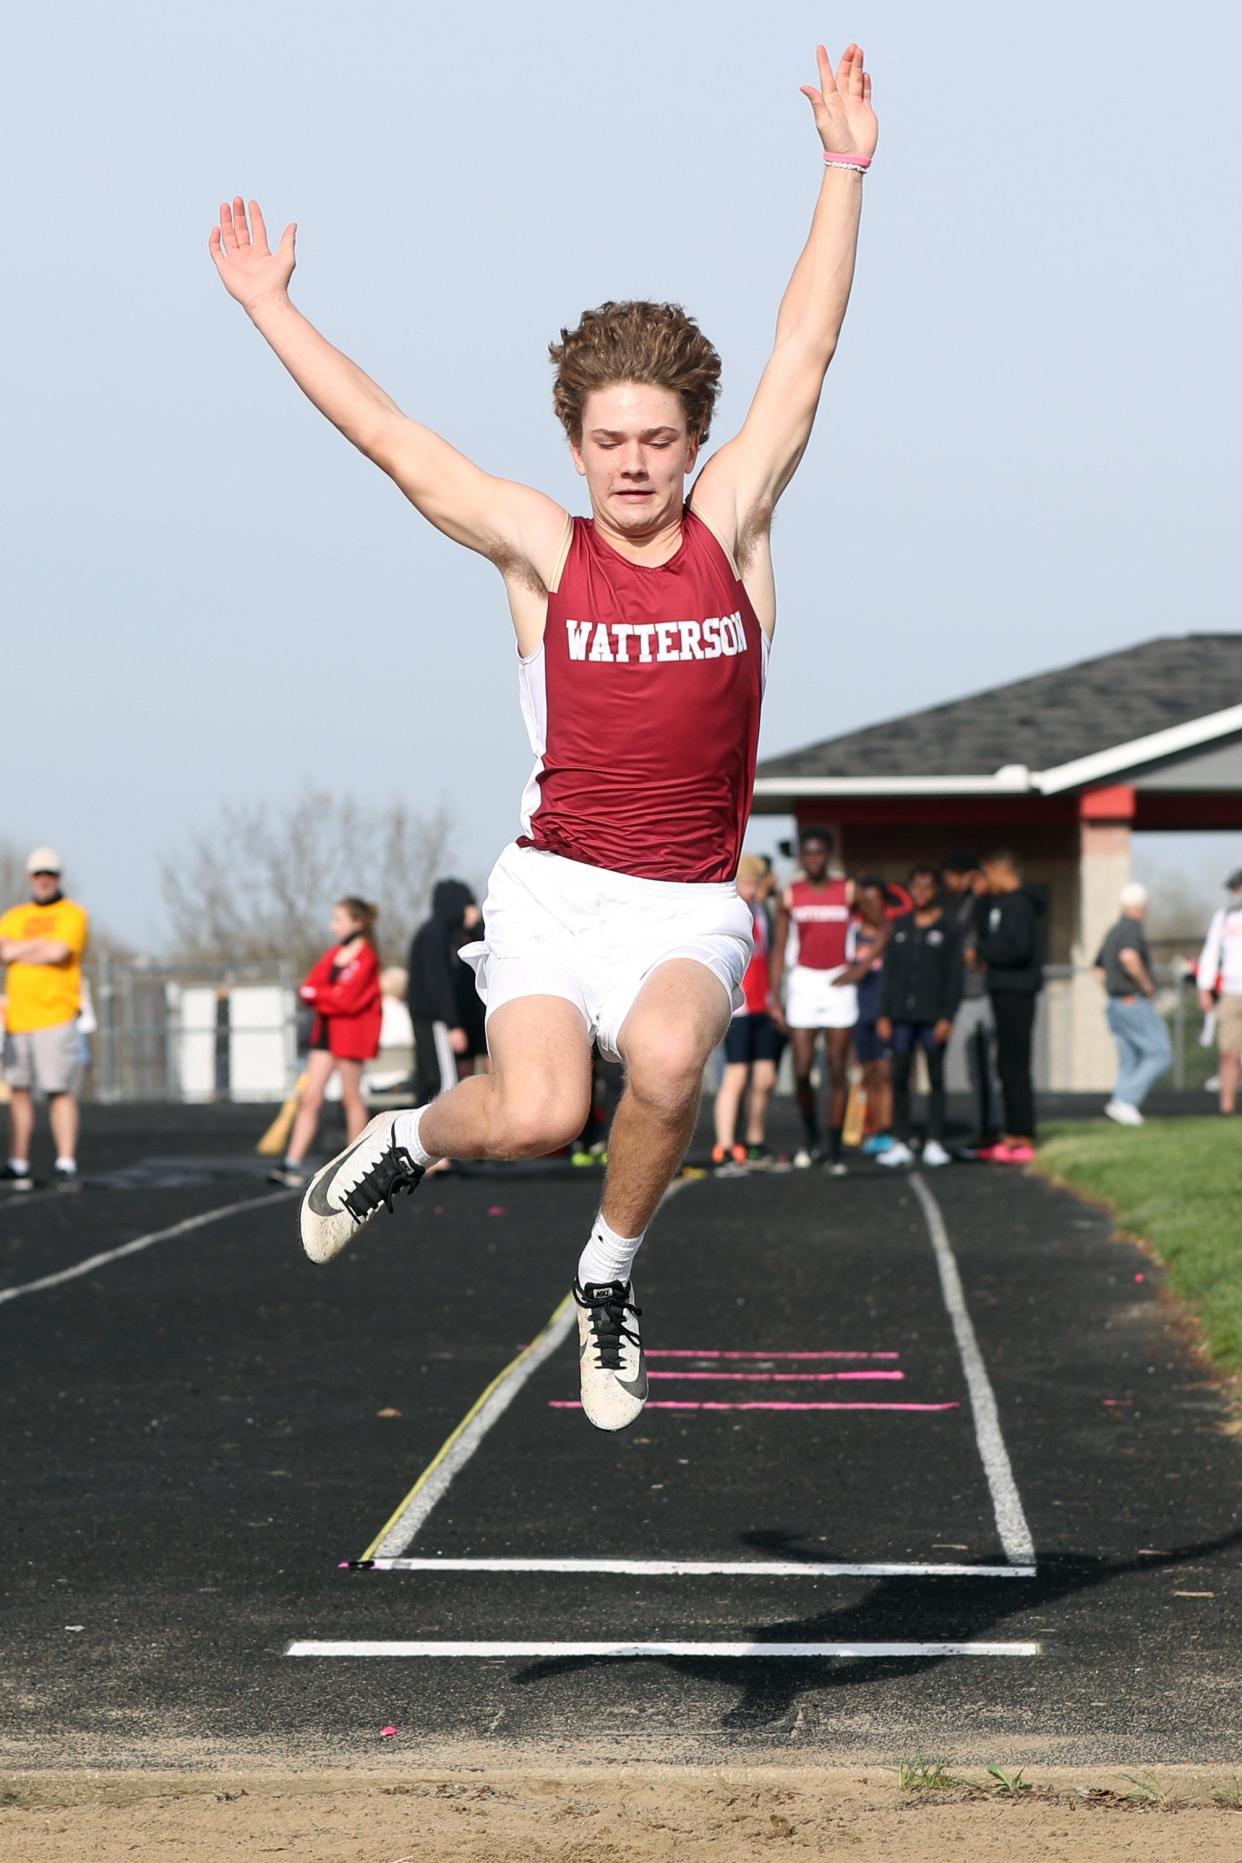 Junior Mason Bermudez is one of the top competitors for Watterson, contributing in the long jump and to a deep group of middle-distance runners.